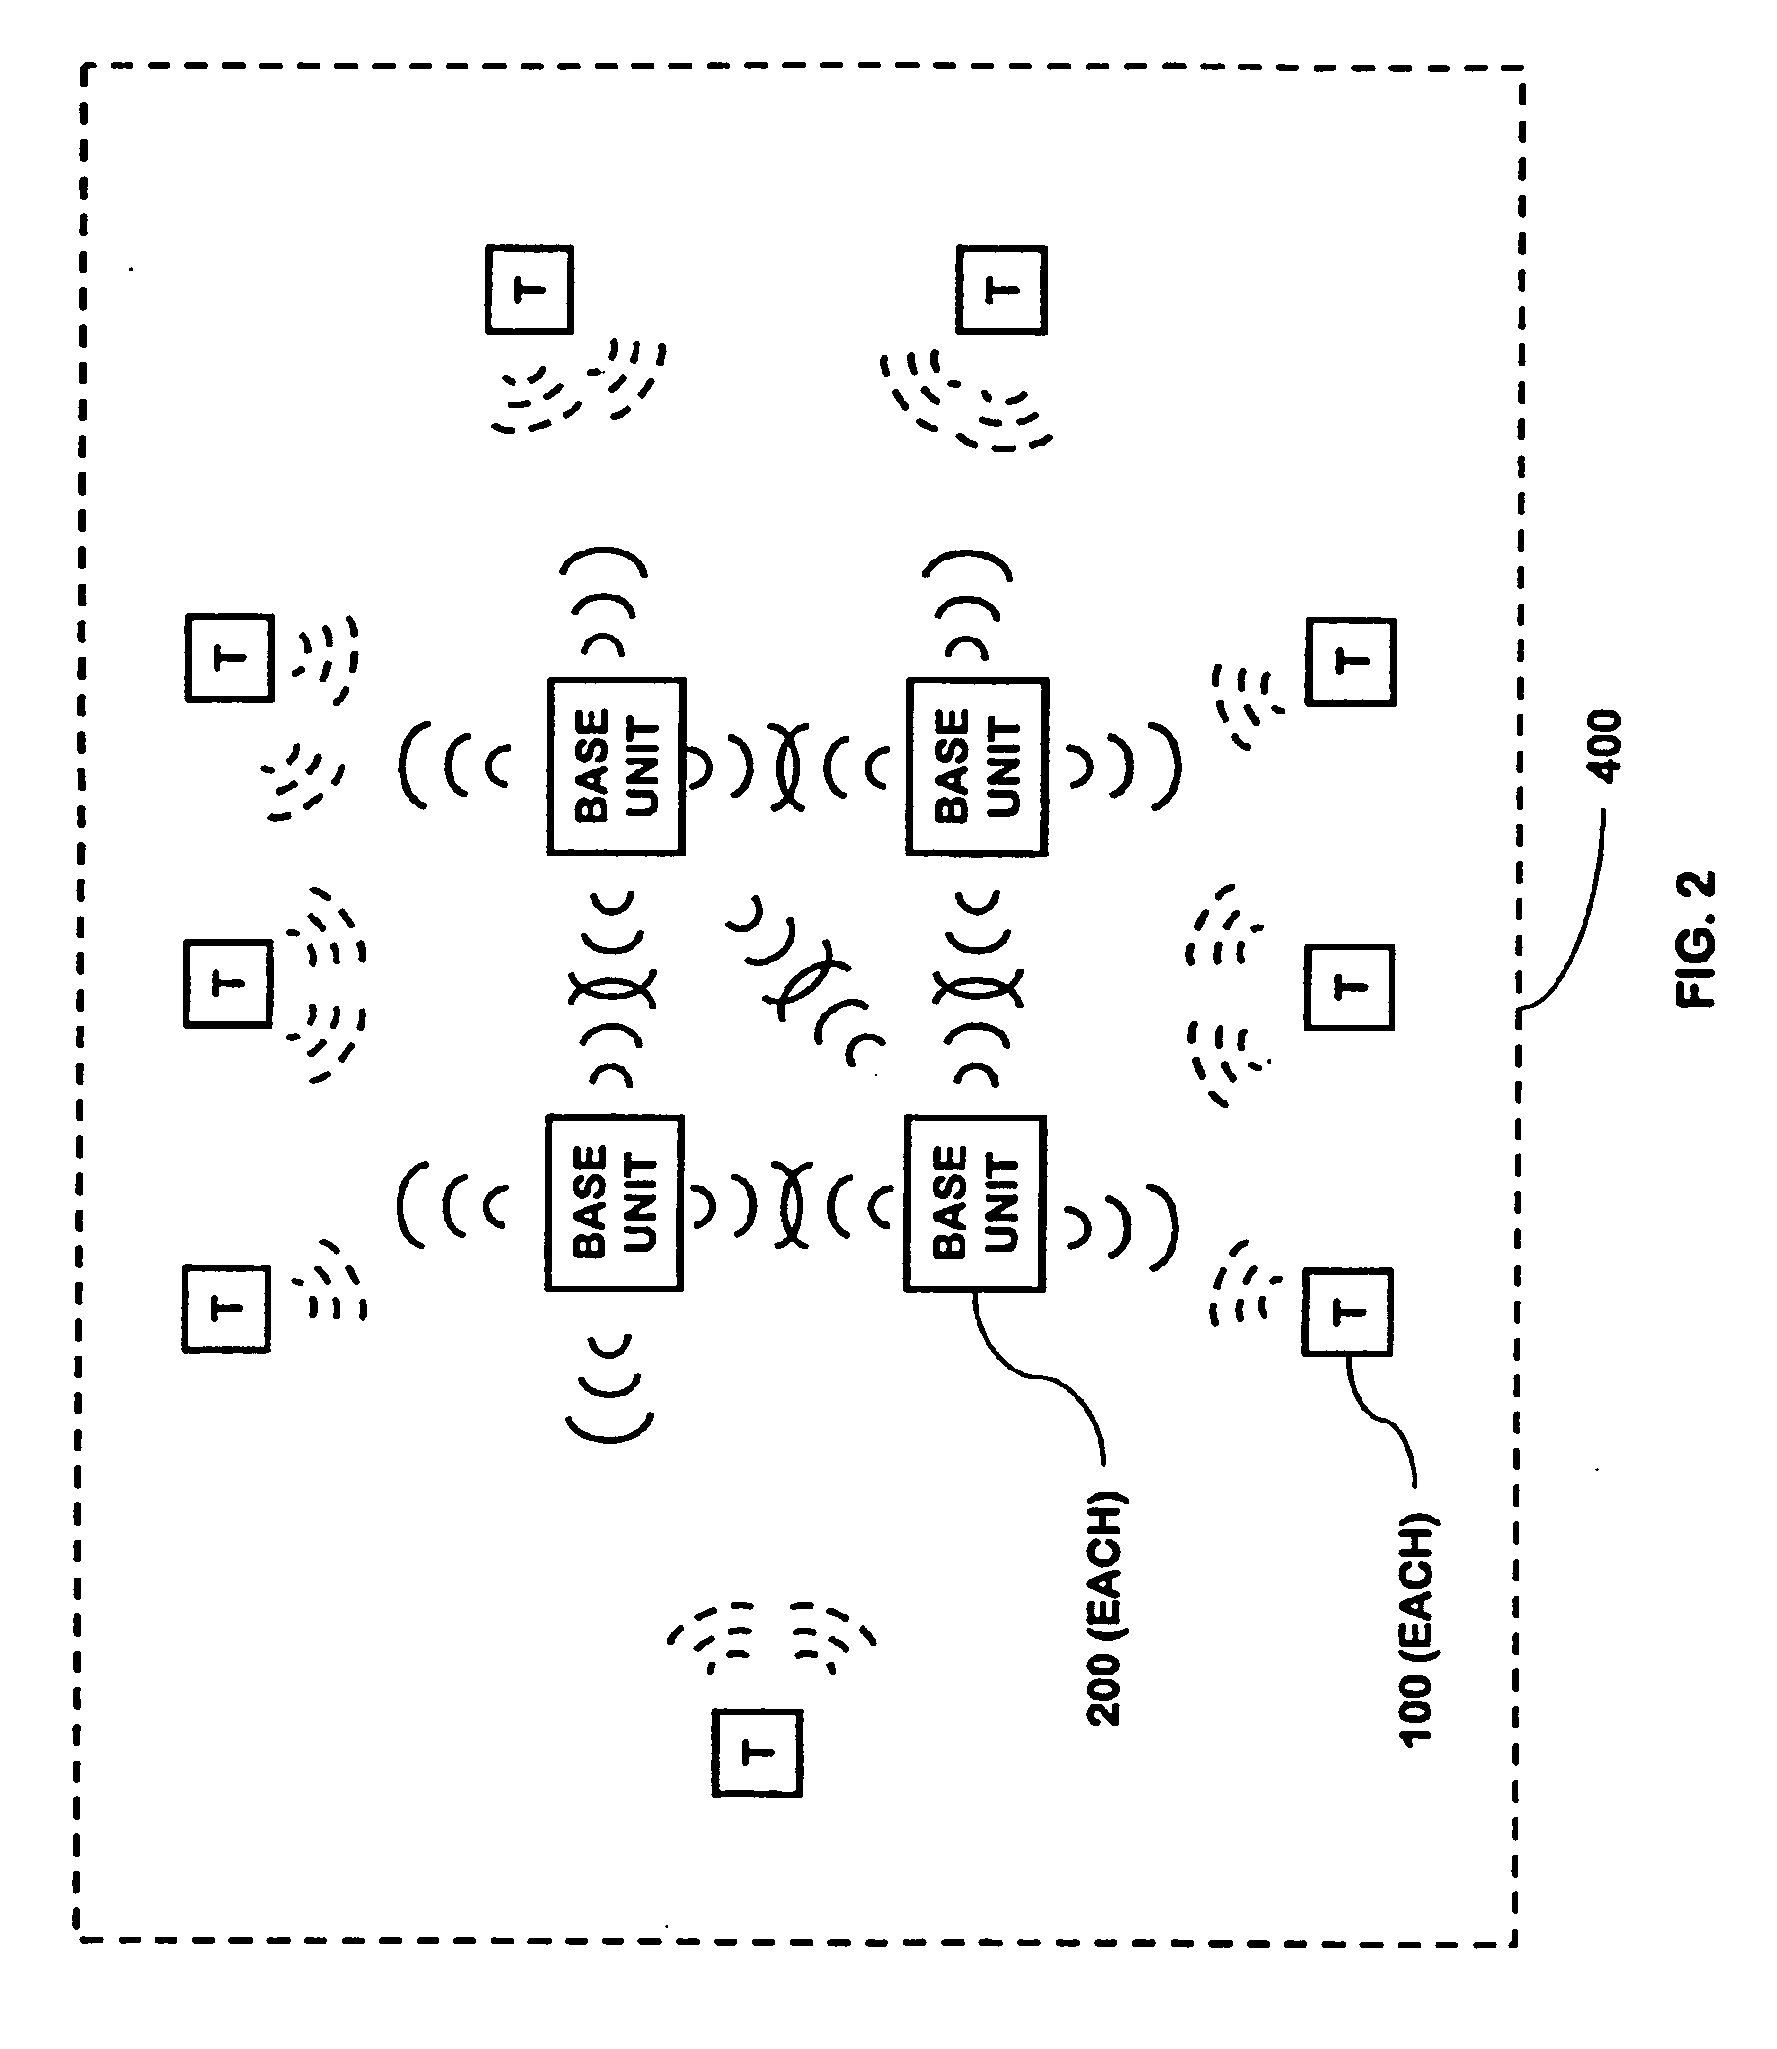 Power management of transponders and sensors in an RFID security network